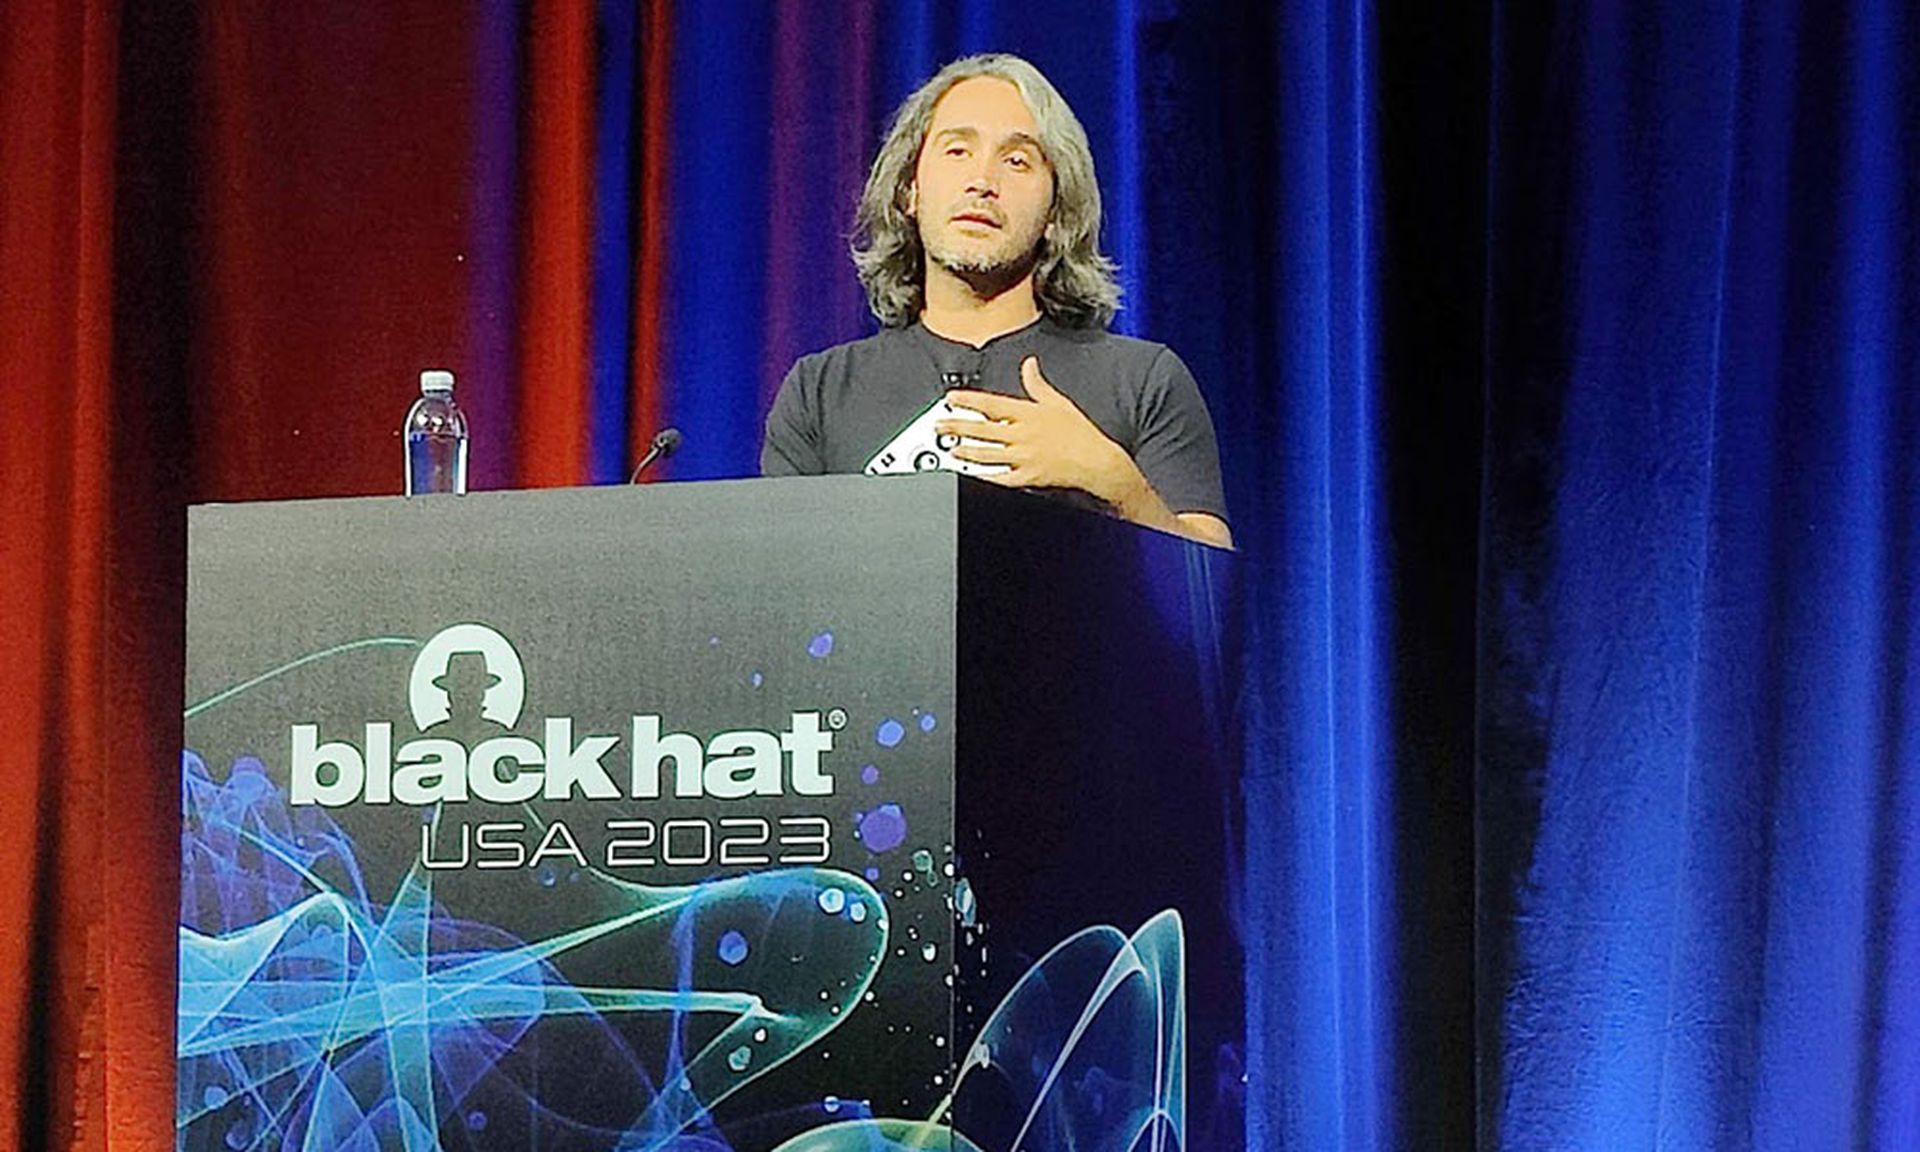 A young man with long gray hair and wearing a black T-shirt speaks at a podium labeled 'Black Hat.'